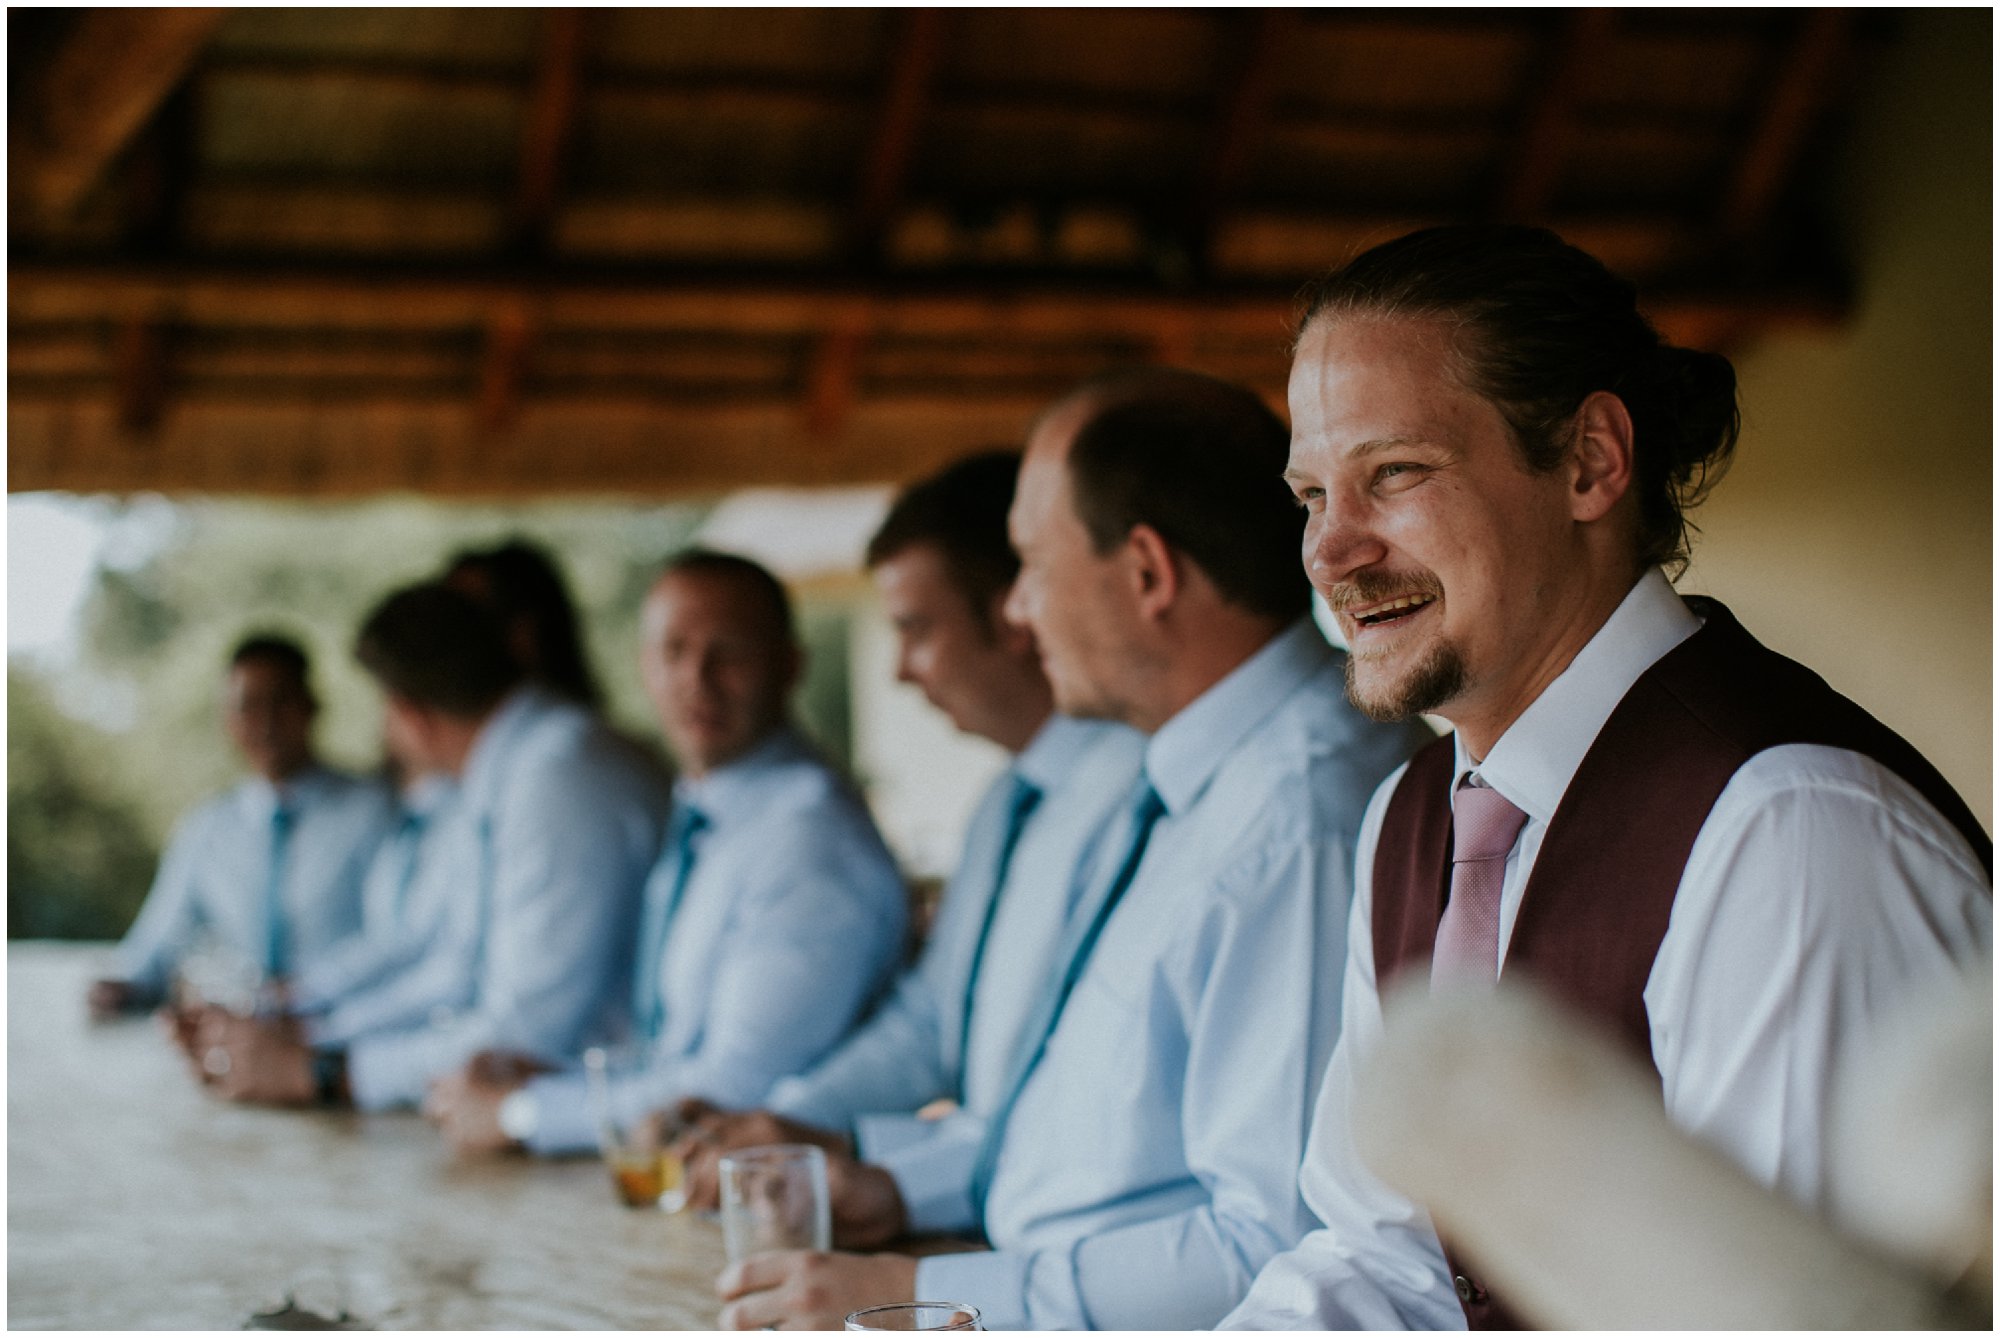 Groom and Groomsmen at an Outdoor Bohemian Destination Wedding at Francine’s Venue in Hoedspruit Limpopo by Junebug World's Best Photographer Maryke Albertyn Award Winning International Alternative Moody Photography based in Cape Town South Africa